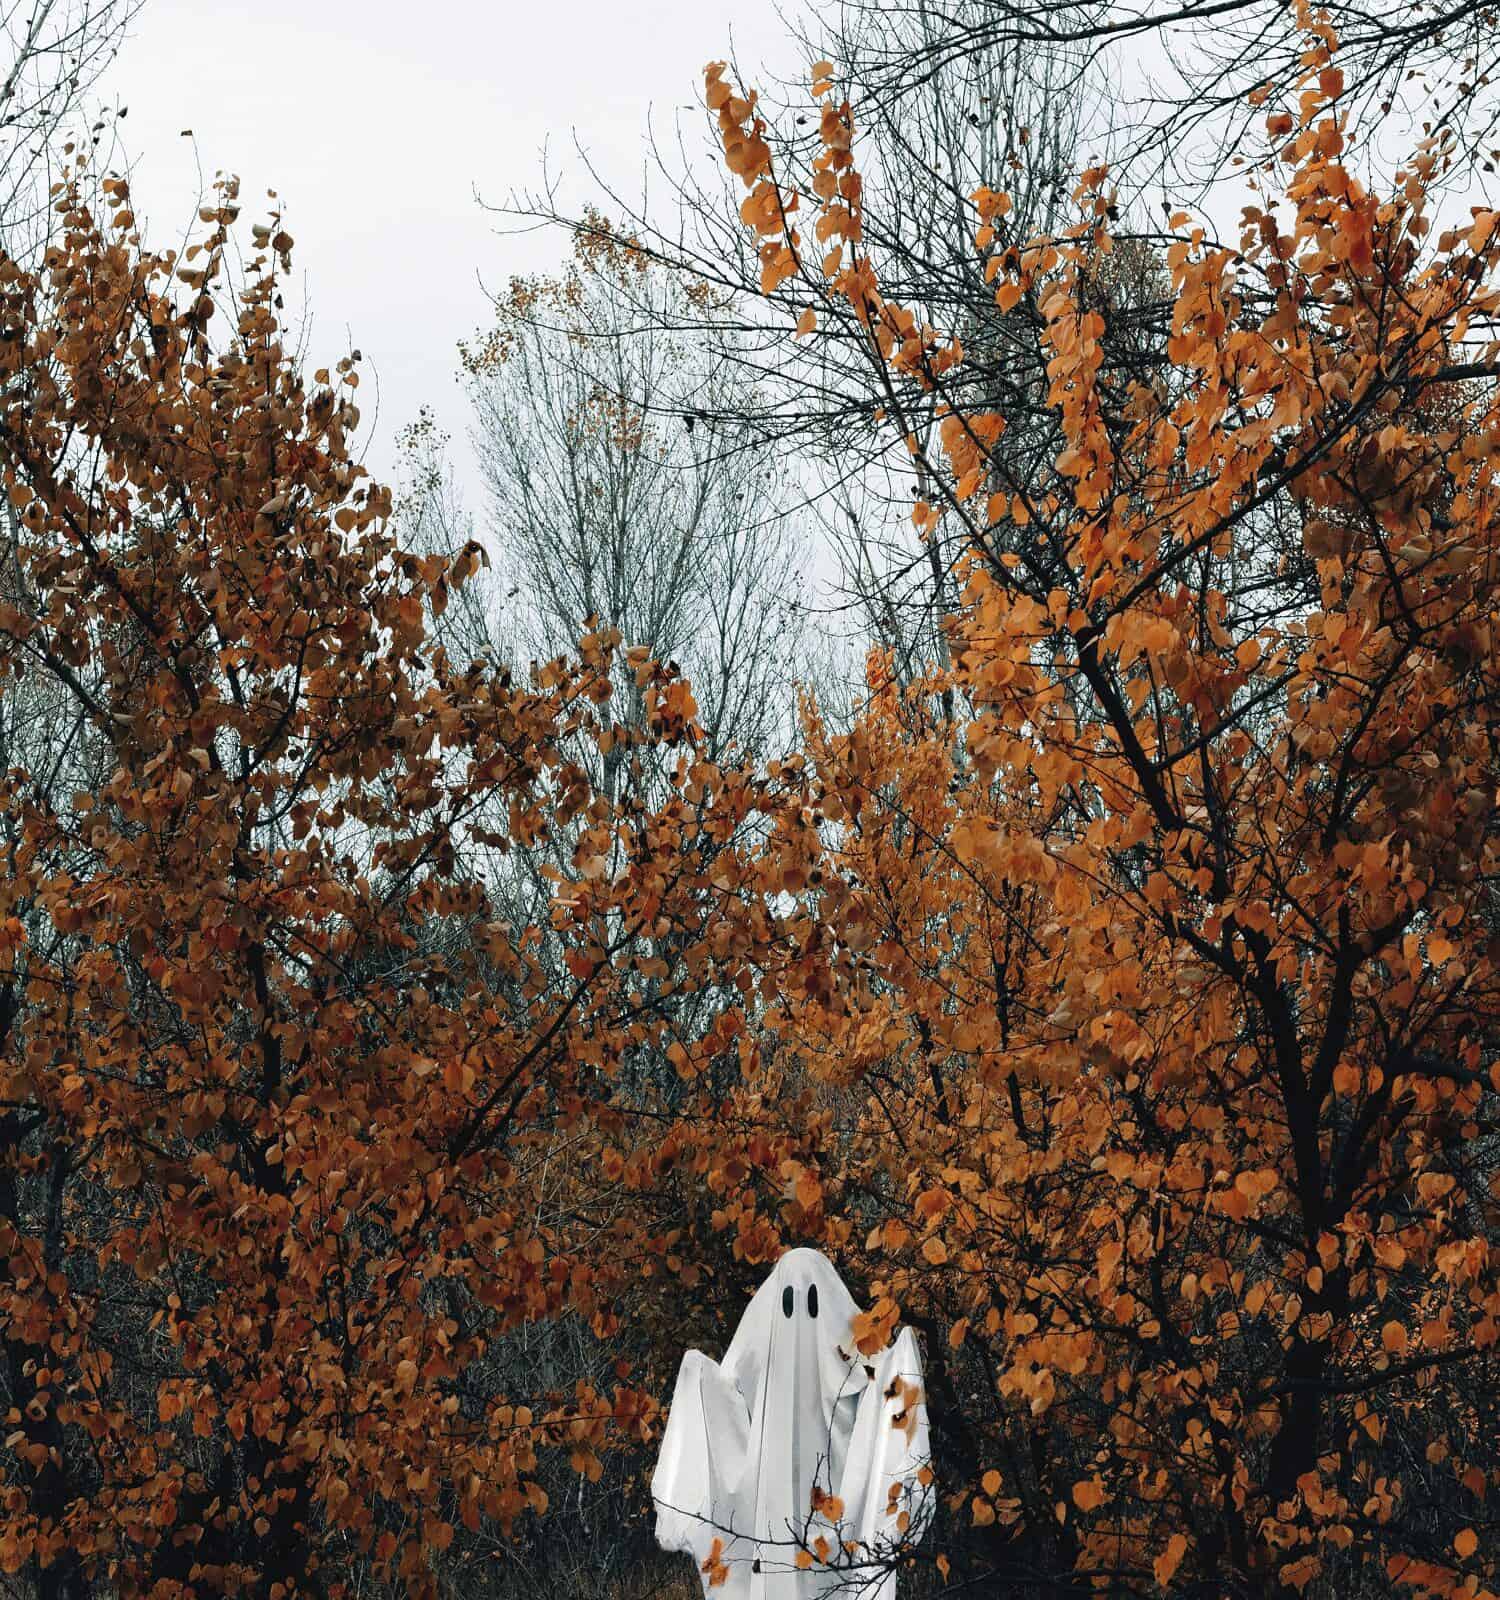 The ghost is covered with a white ghostly sheet in the autumn gloomy forest. A spooky white ghost peeks out from behind a tree